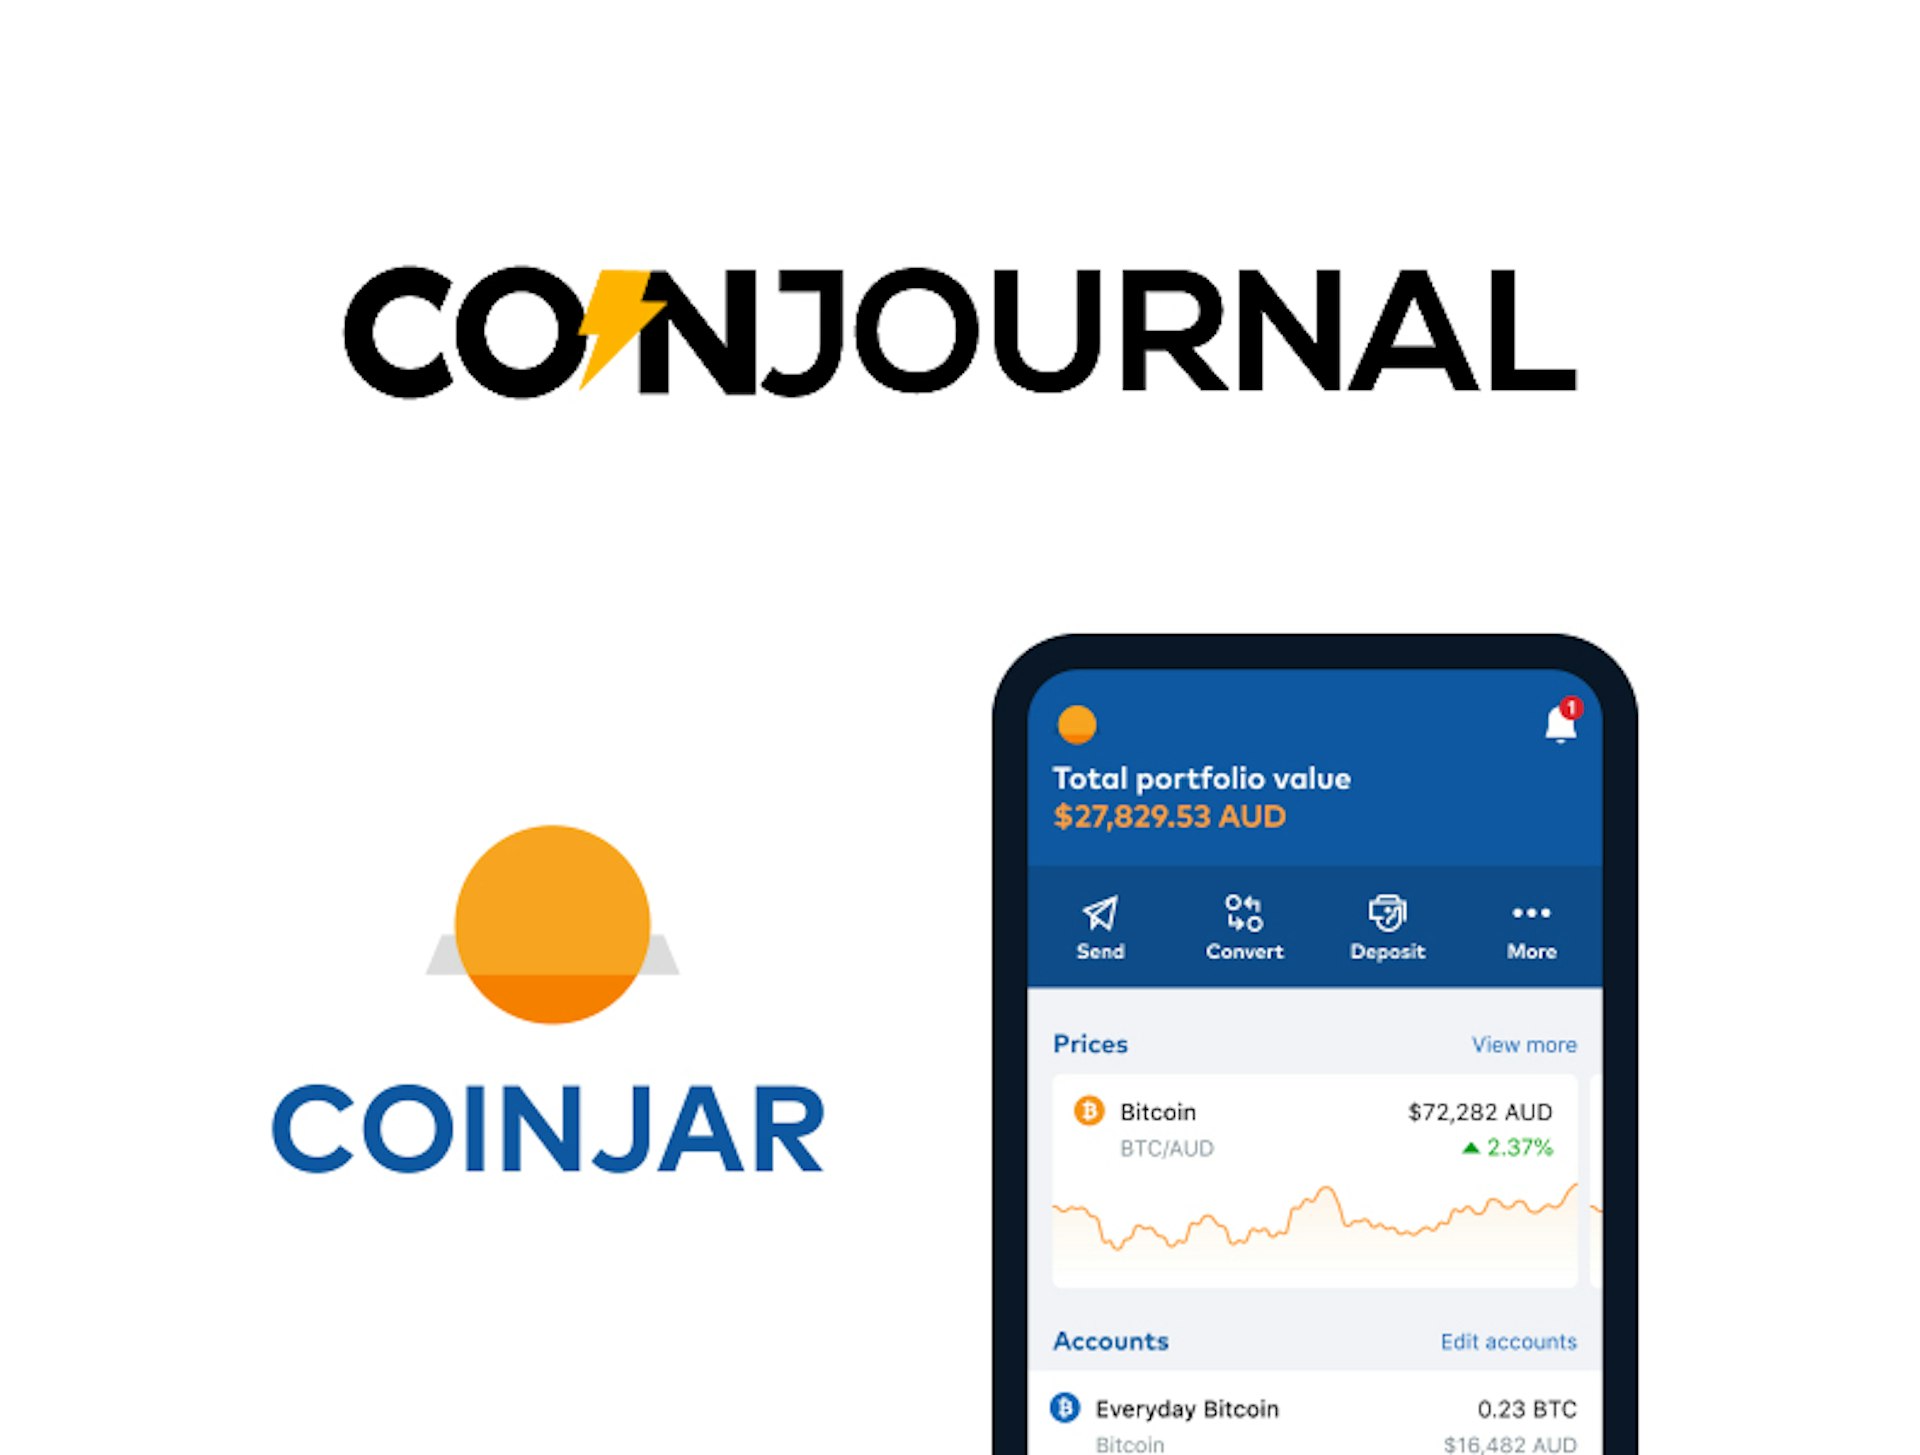 press-page_2021_04_coinjournal.jpg